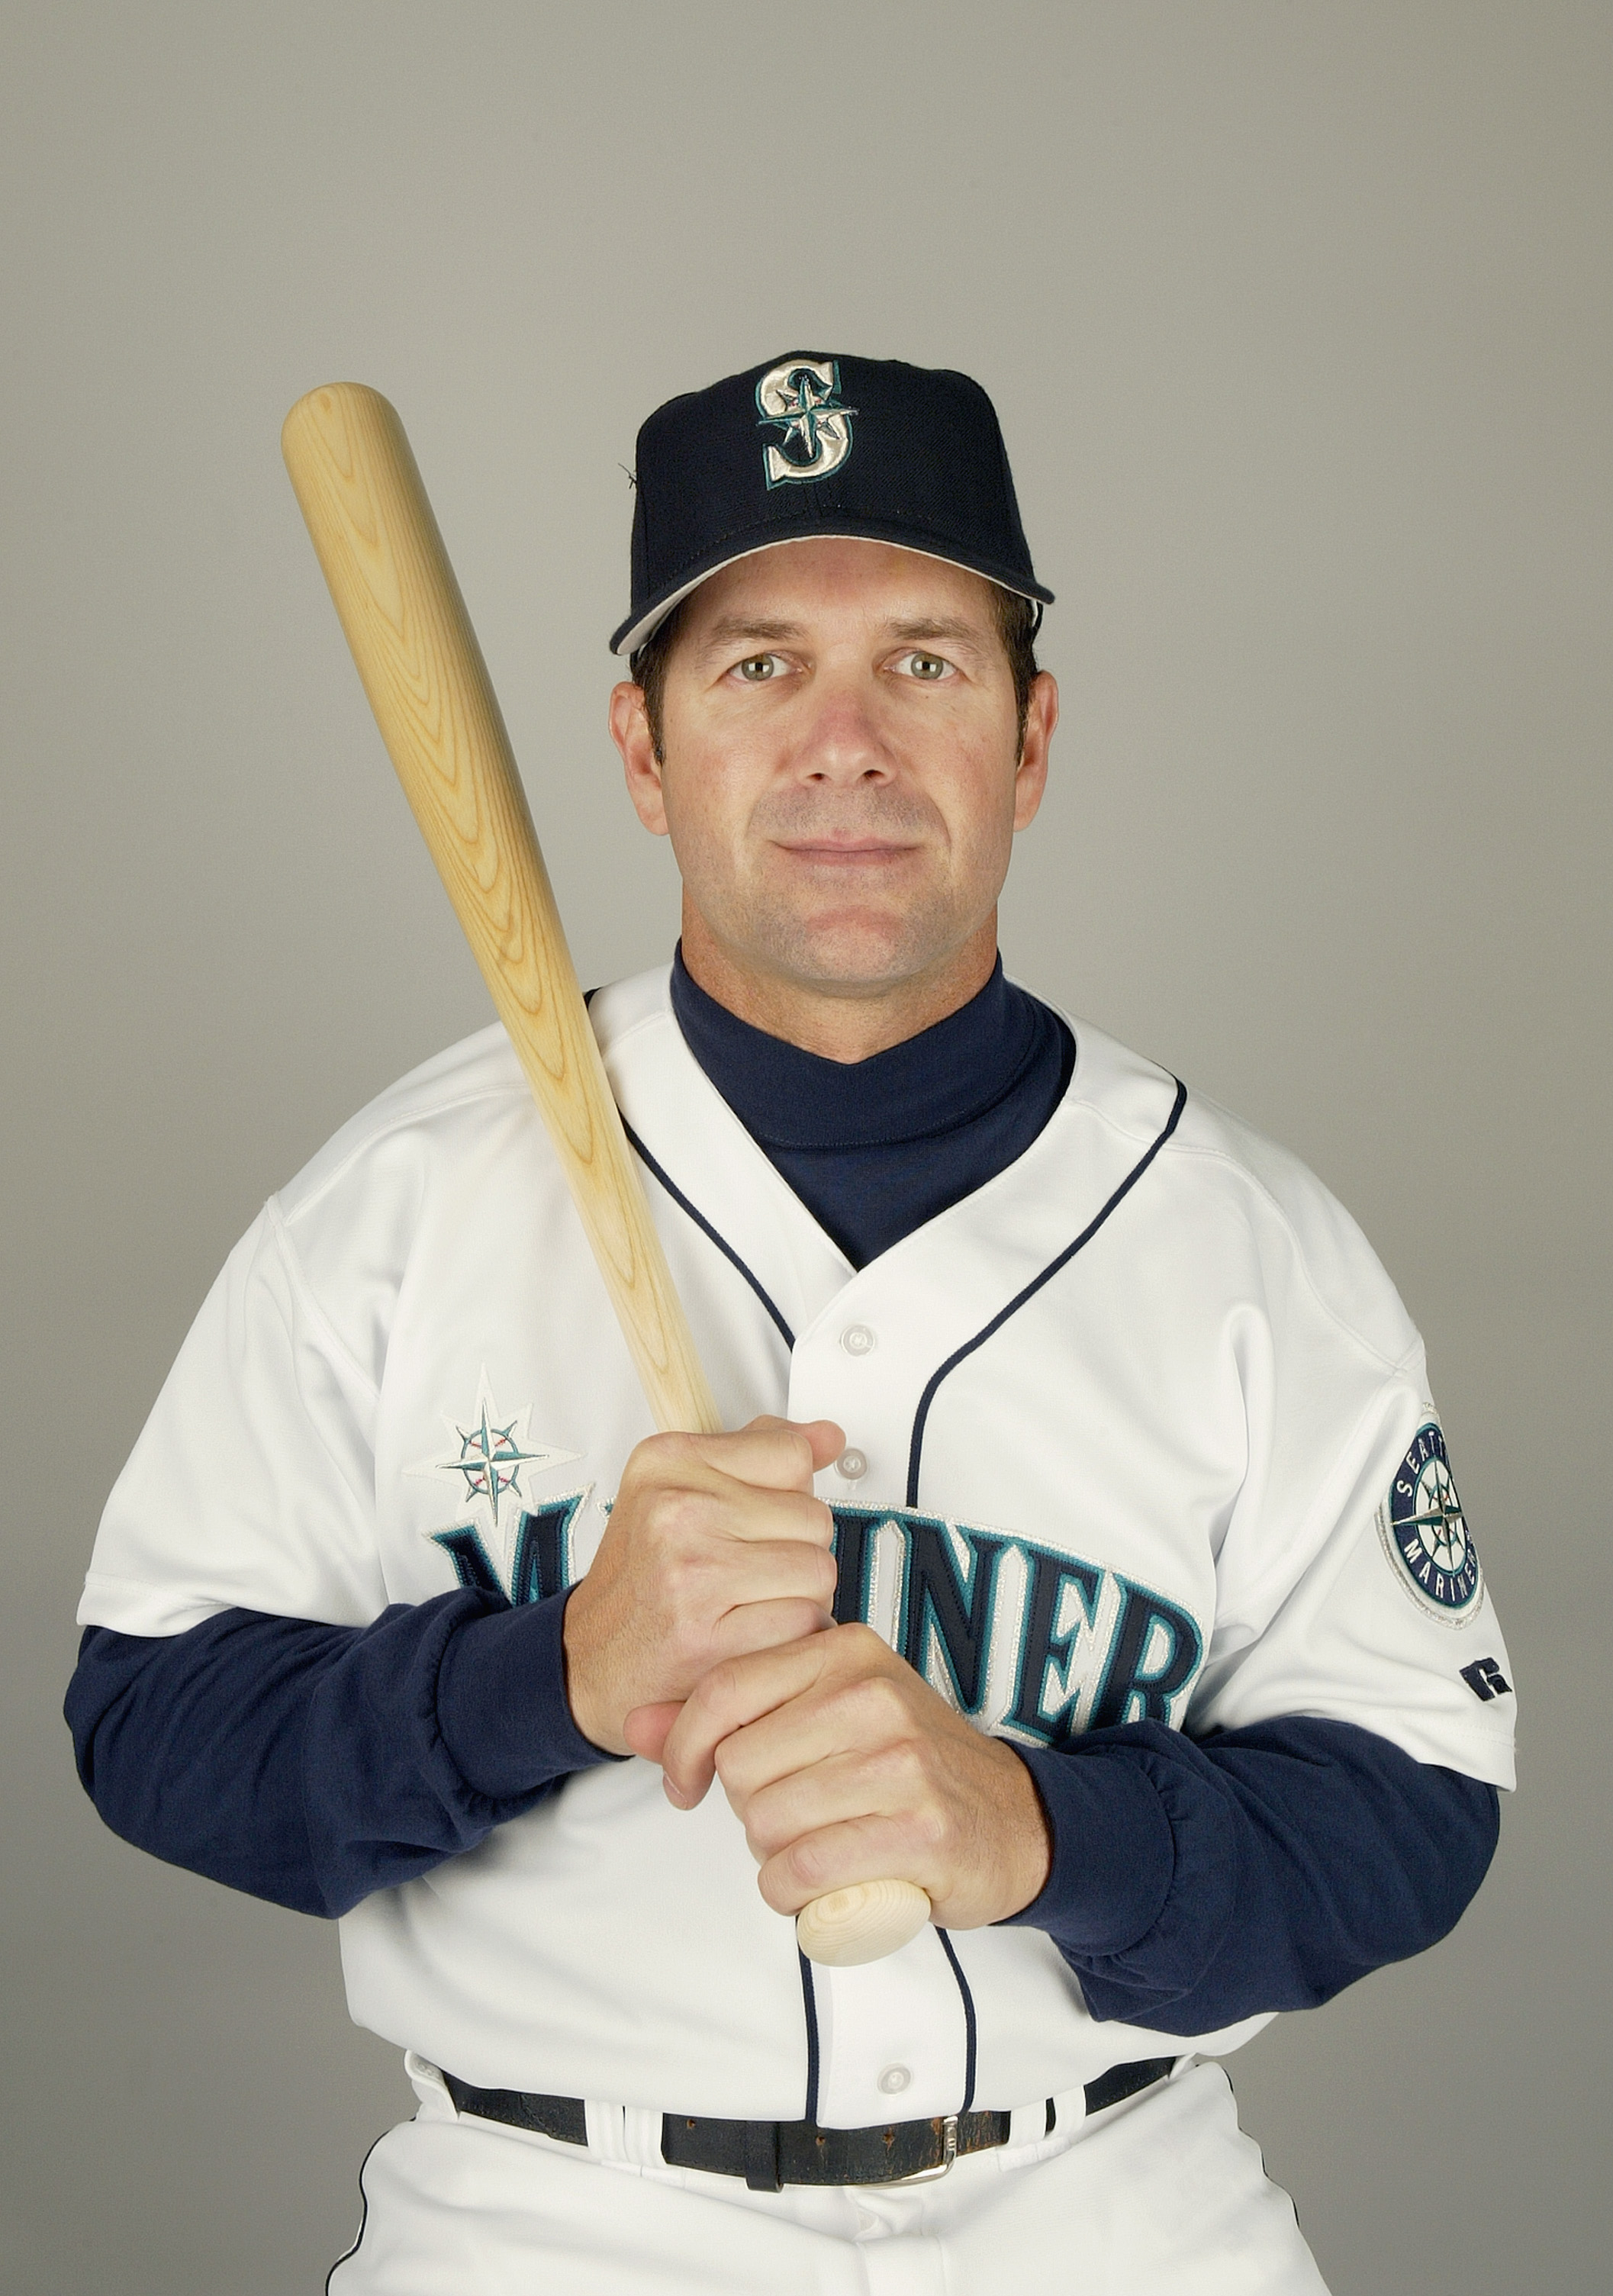 PEORIA, AZ - FEBRUARY 27:  Designated hitter Edgar Martinez #11 of the Seattle Mariners poses for a portrait during the 2004 MLB Spring Training Photo Day at Peoria Stadium on February 27, 2004 in Peoria, Arizona. (Photo by Harry How/Getty Images)